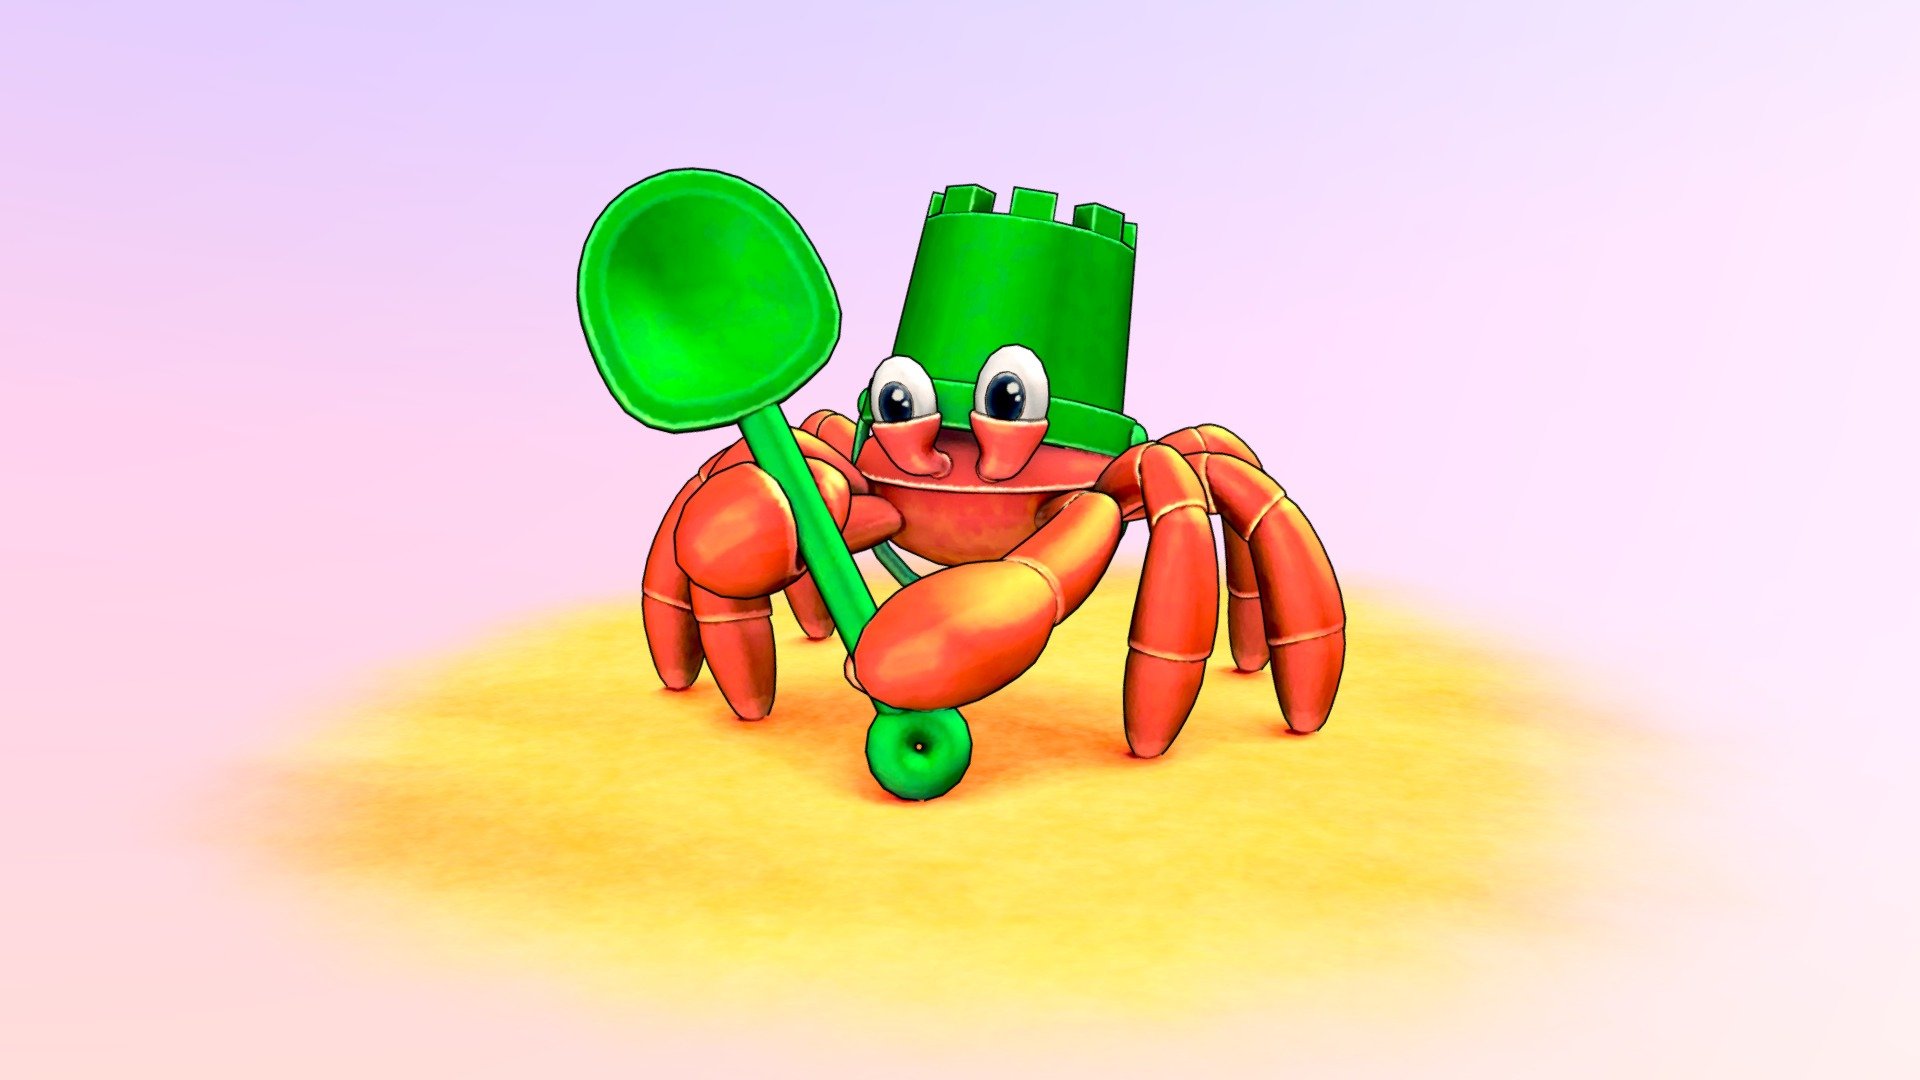 It took a long time but in the end, the idea came up. For this week, I have created a crab that steals toys from children on the beach 3d model